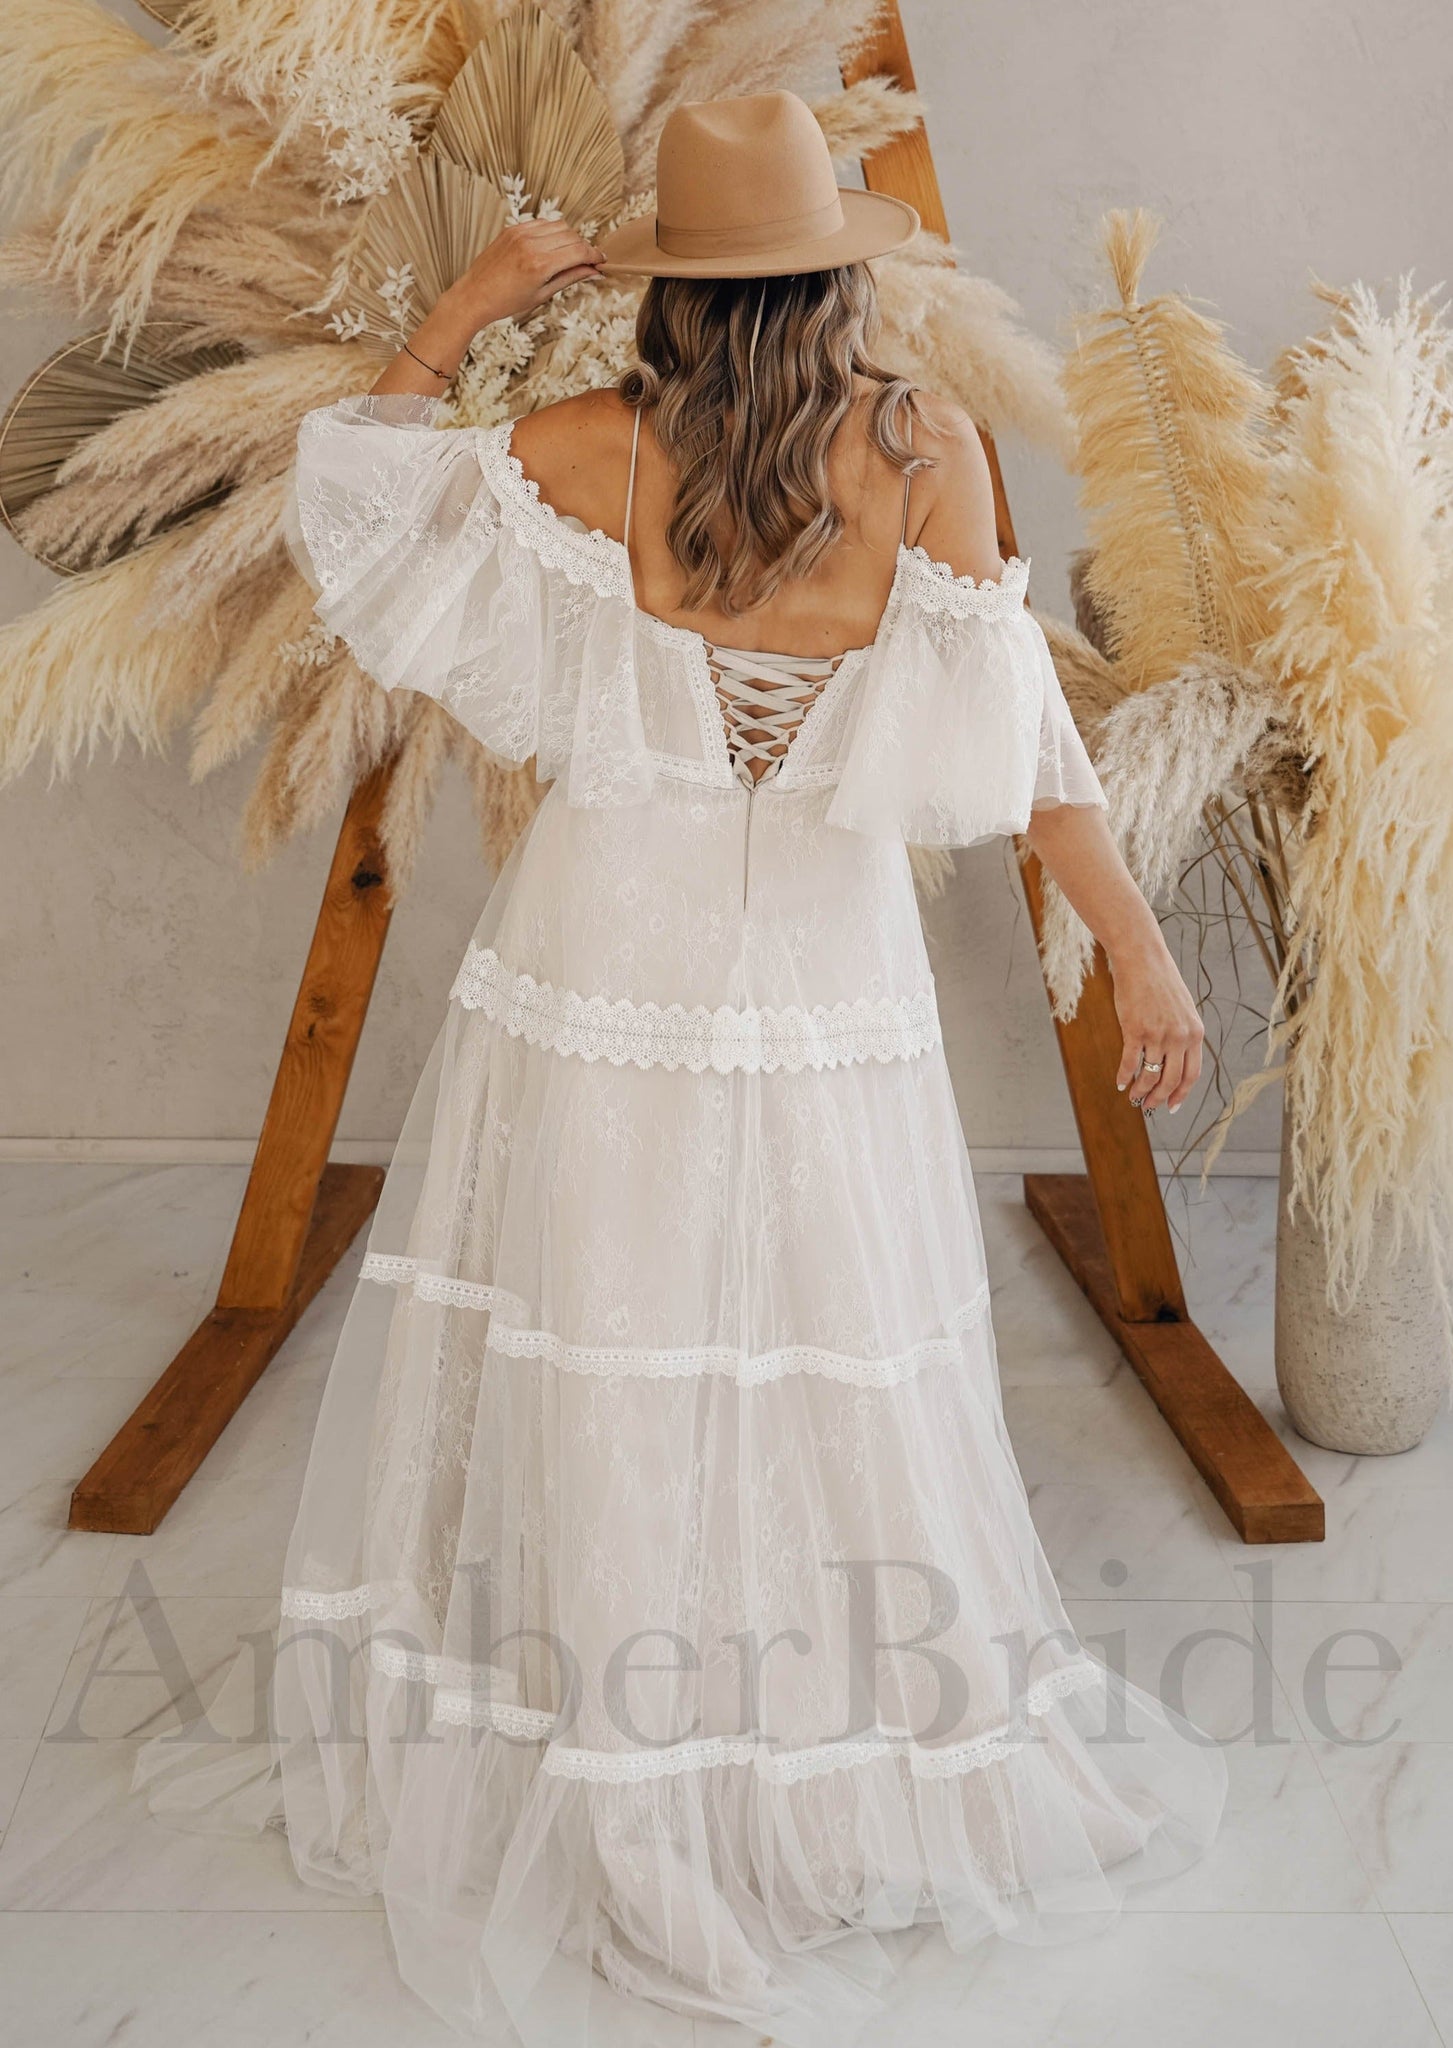 Boho A-Line Lace Wedding Dress with Off-the-Shoulder Design and Lace Detailing